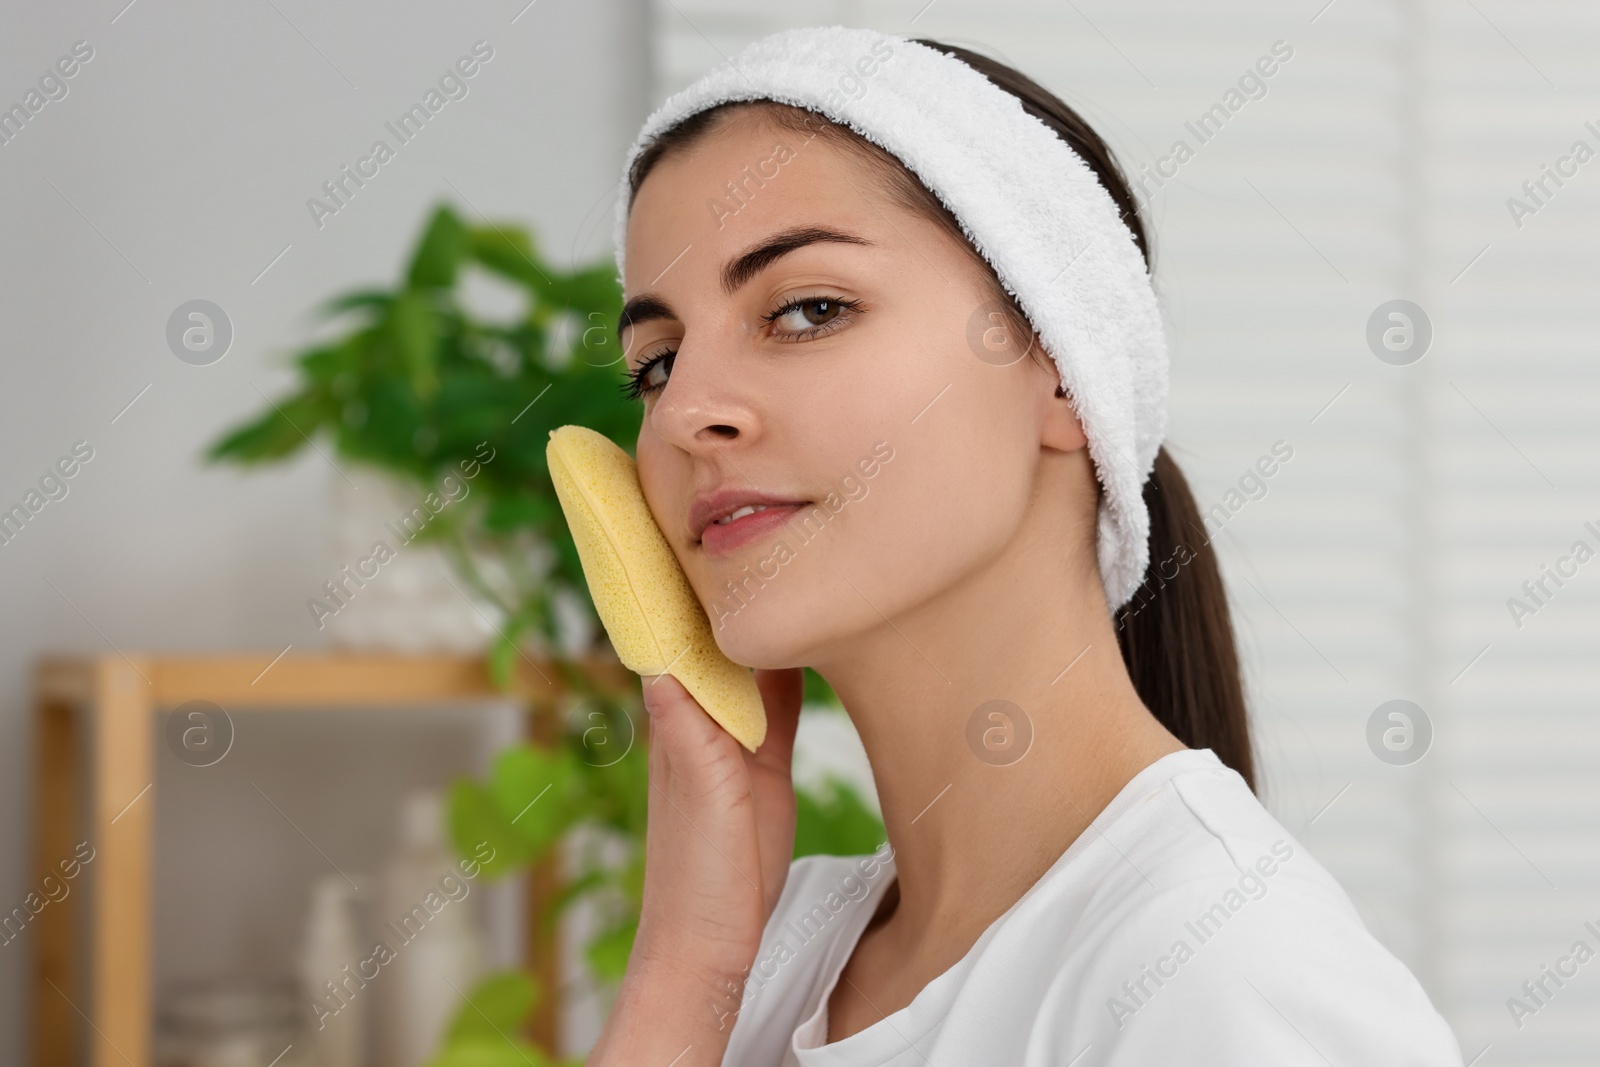 Photo of Young woman with headband washing her face using sponge in bathroom